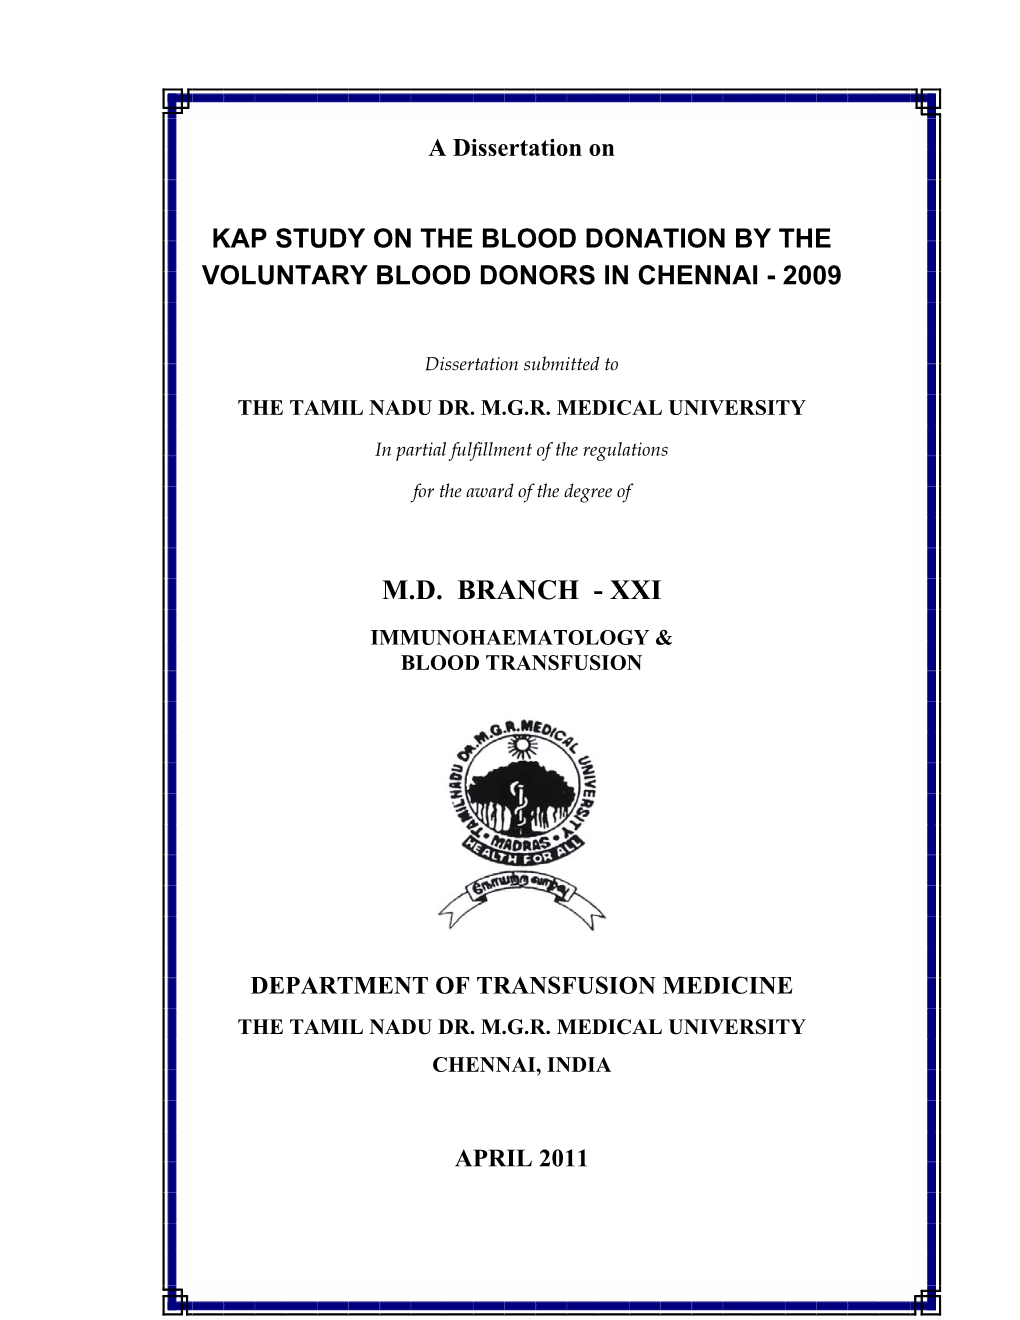 Kap Study on the Blood Donation by the Voluntary Blood Donors in Chennai - 2009